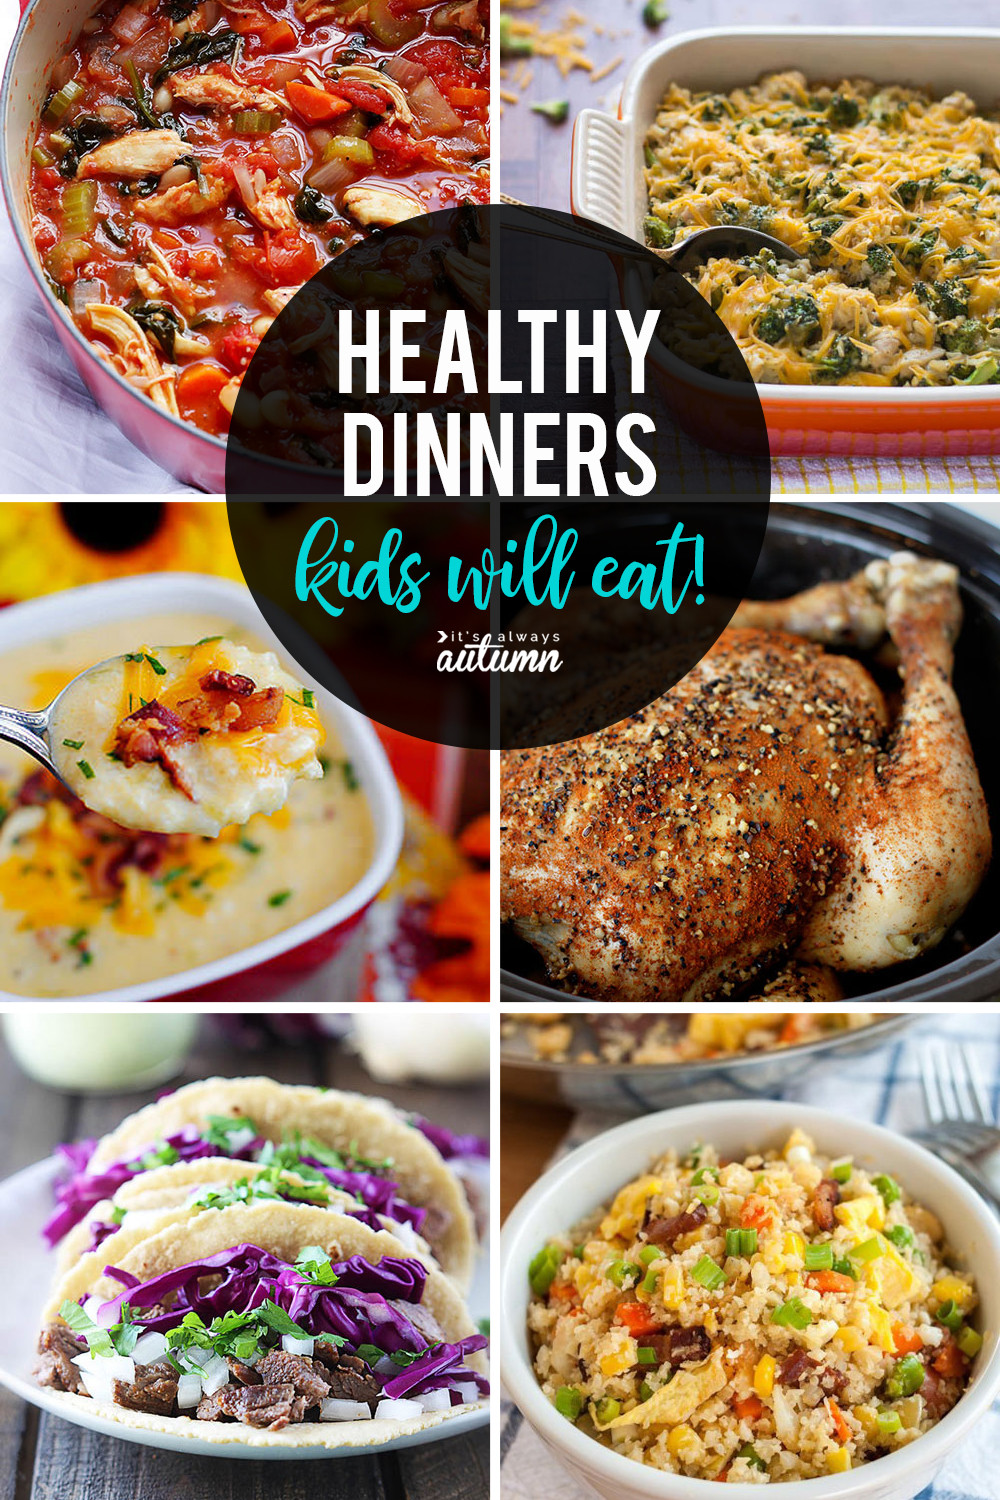 Easy Dinners For Kids
 20 healthy easy recipes your kids will actually want to